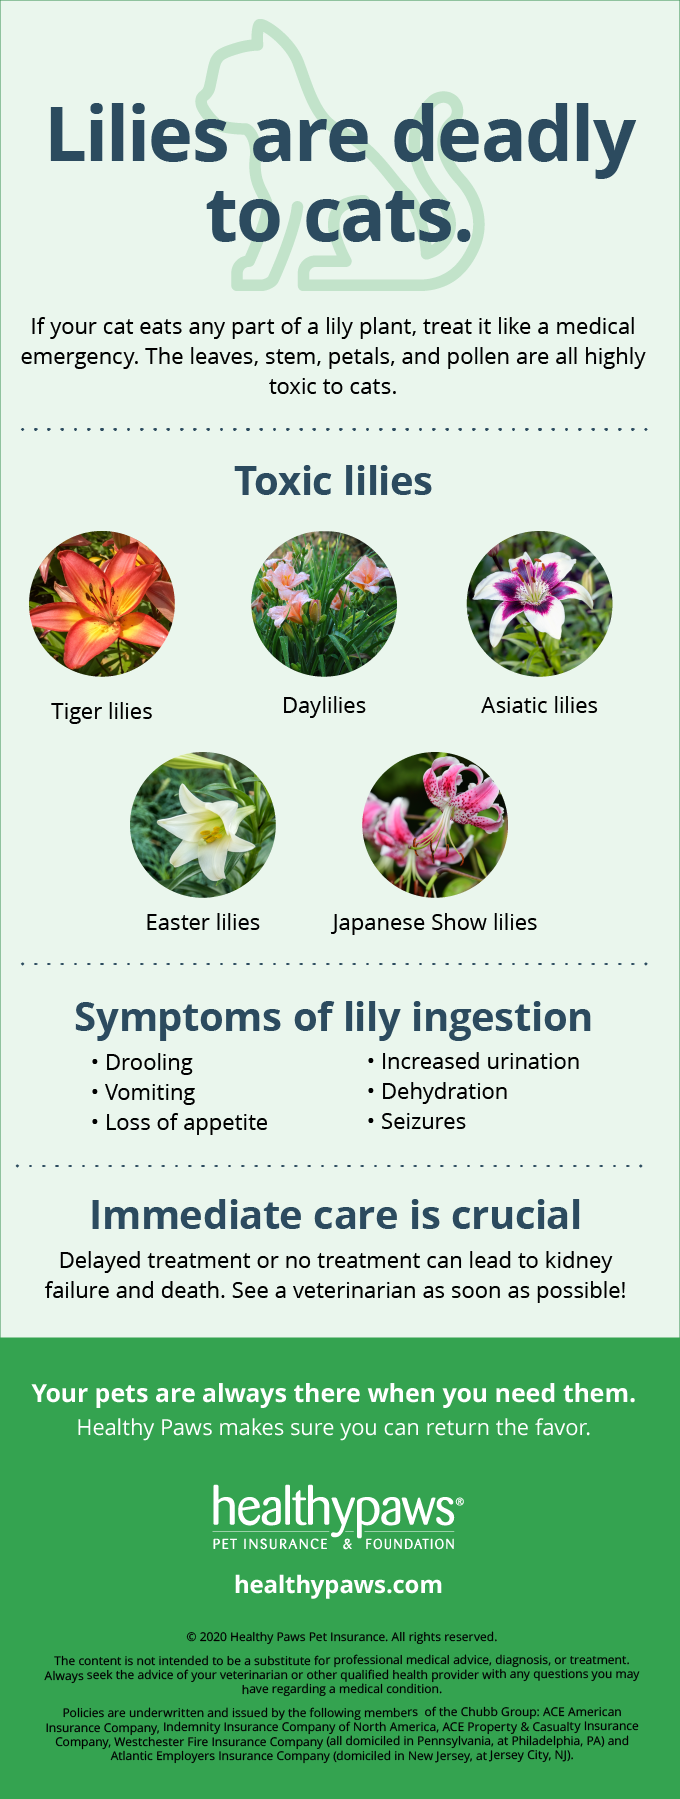 Infographic showing types of lilies and lilies are toxic to pets